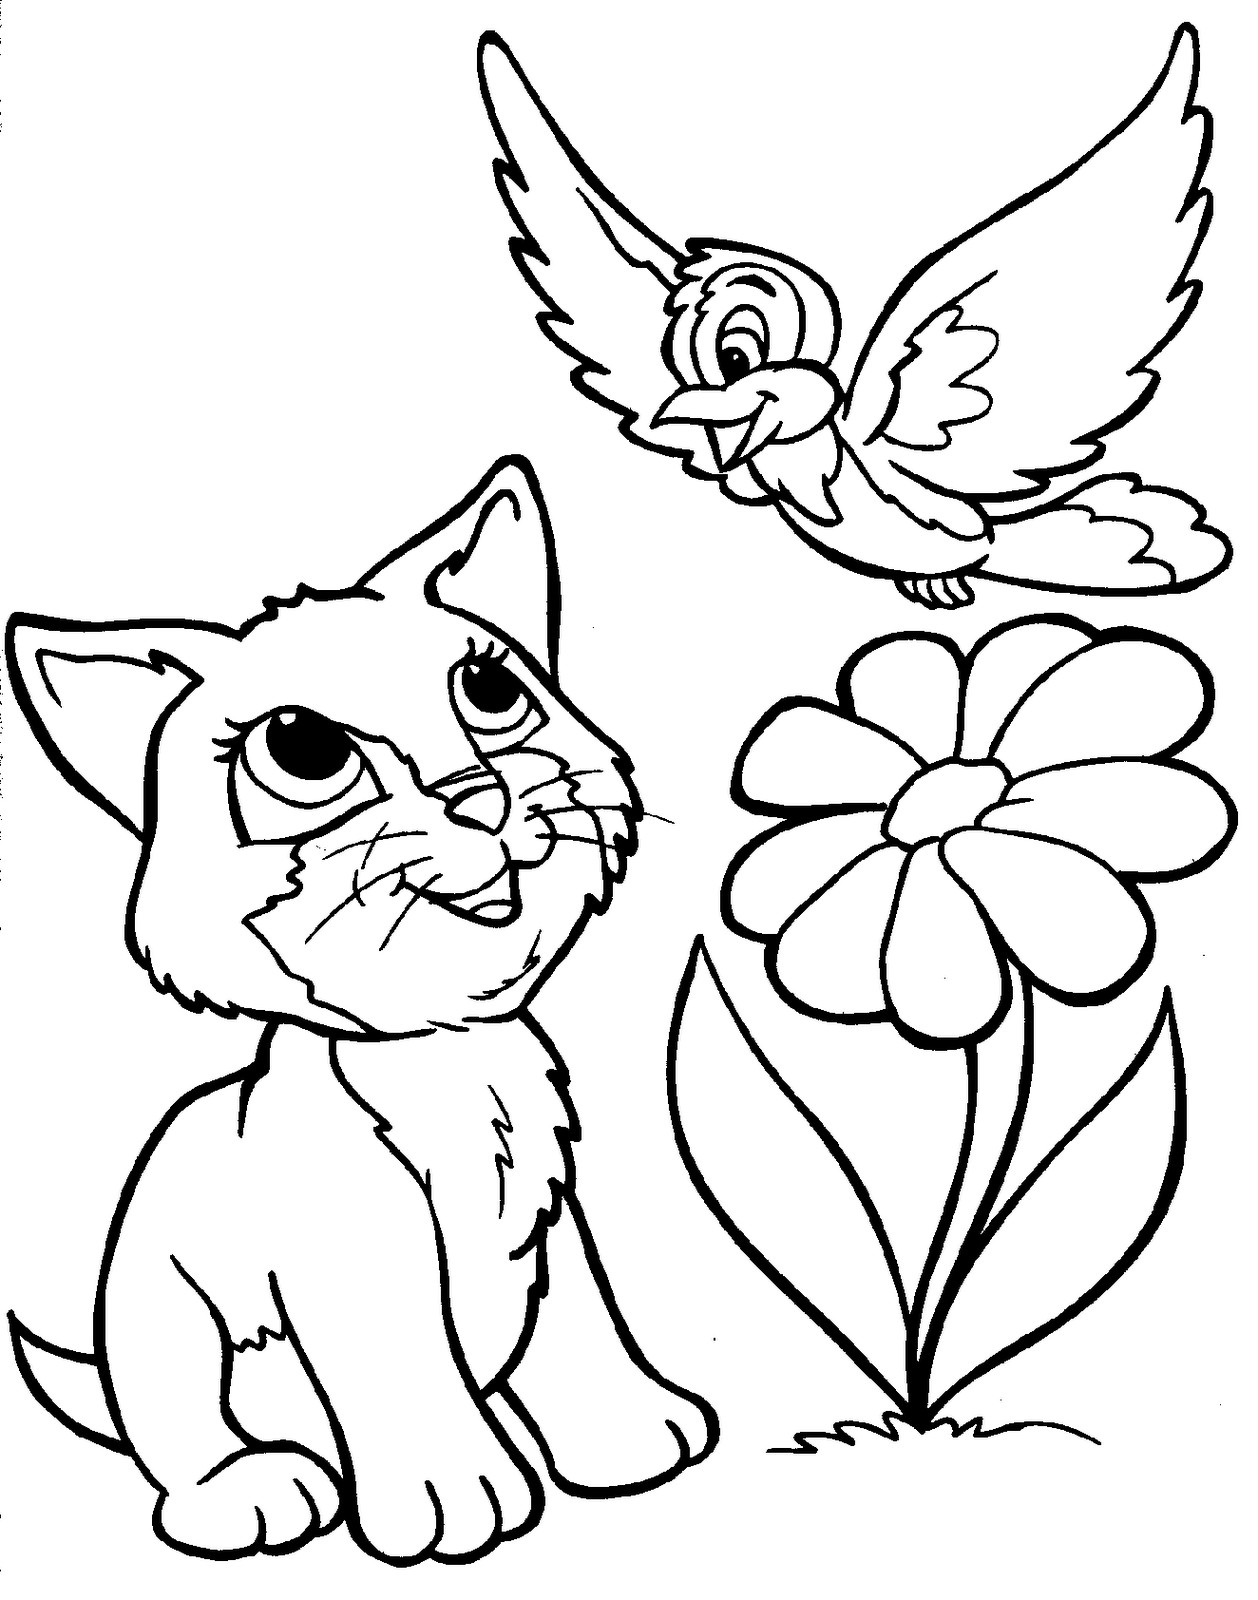 Printable Coloring Pages For Kids Animals
 10 Cute Animals Coloring Pages